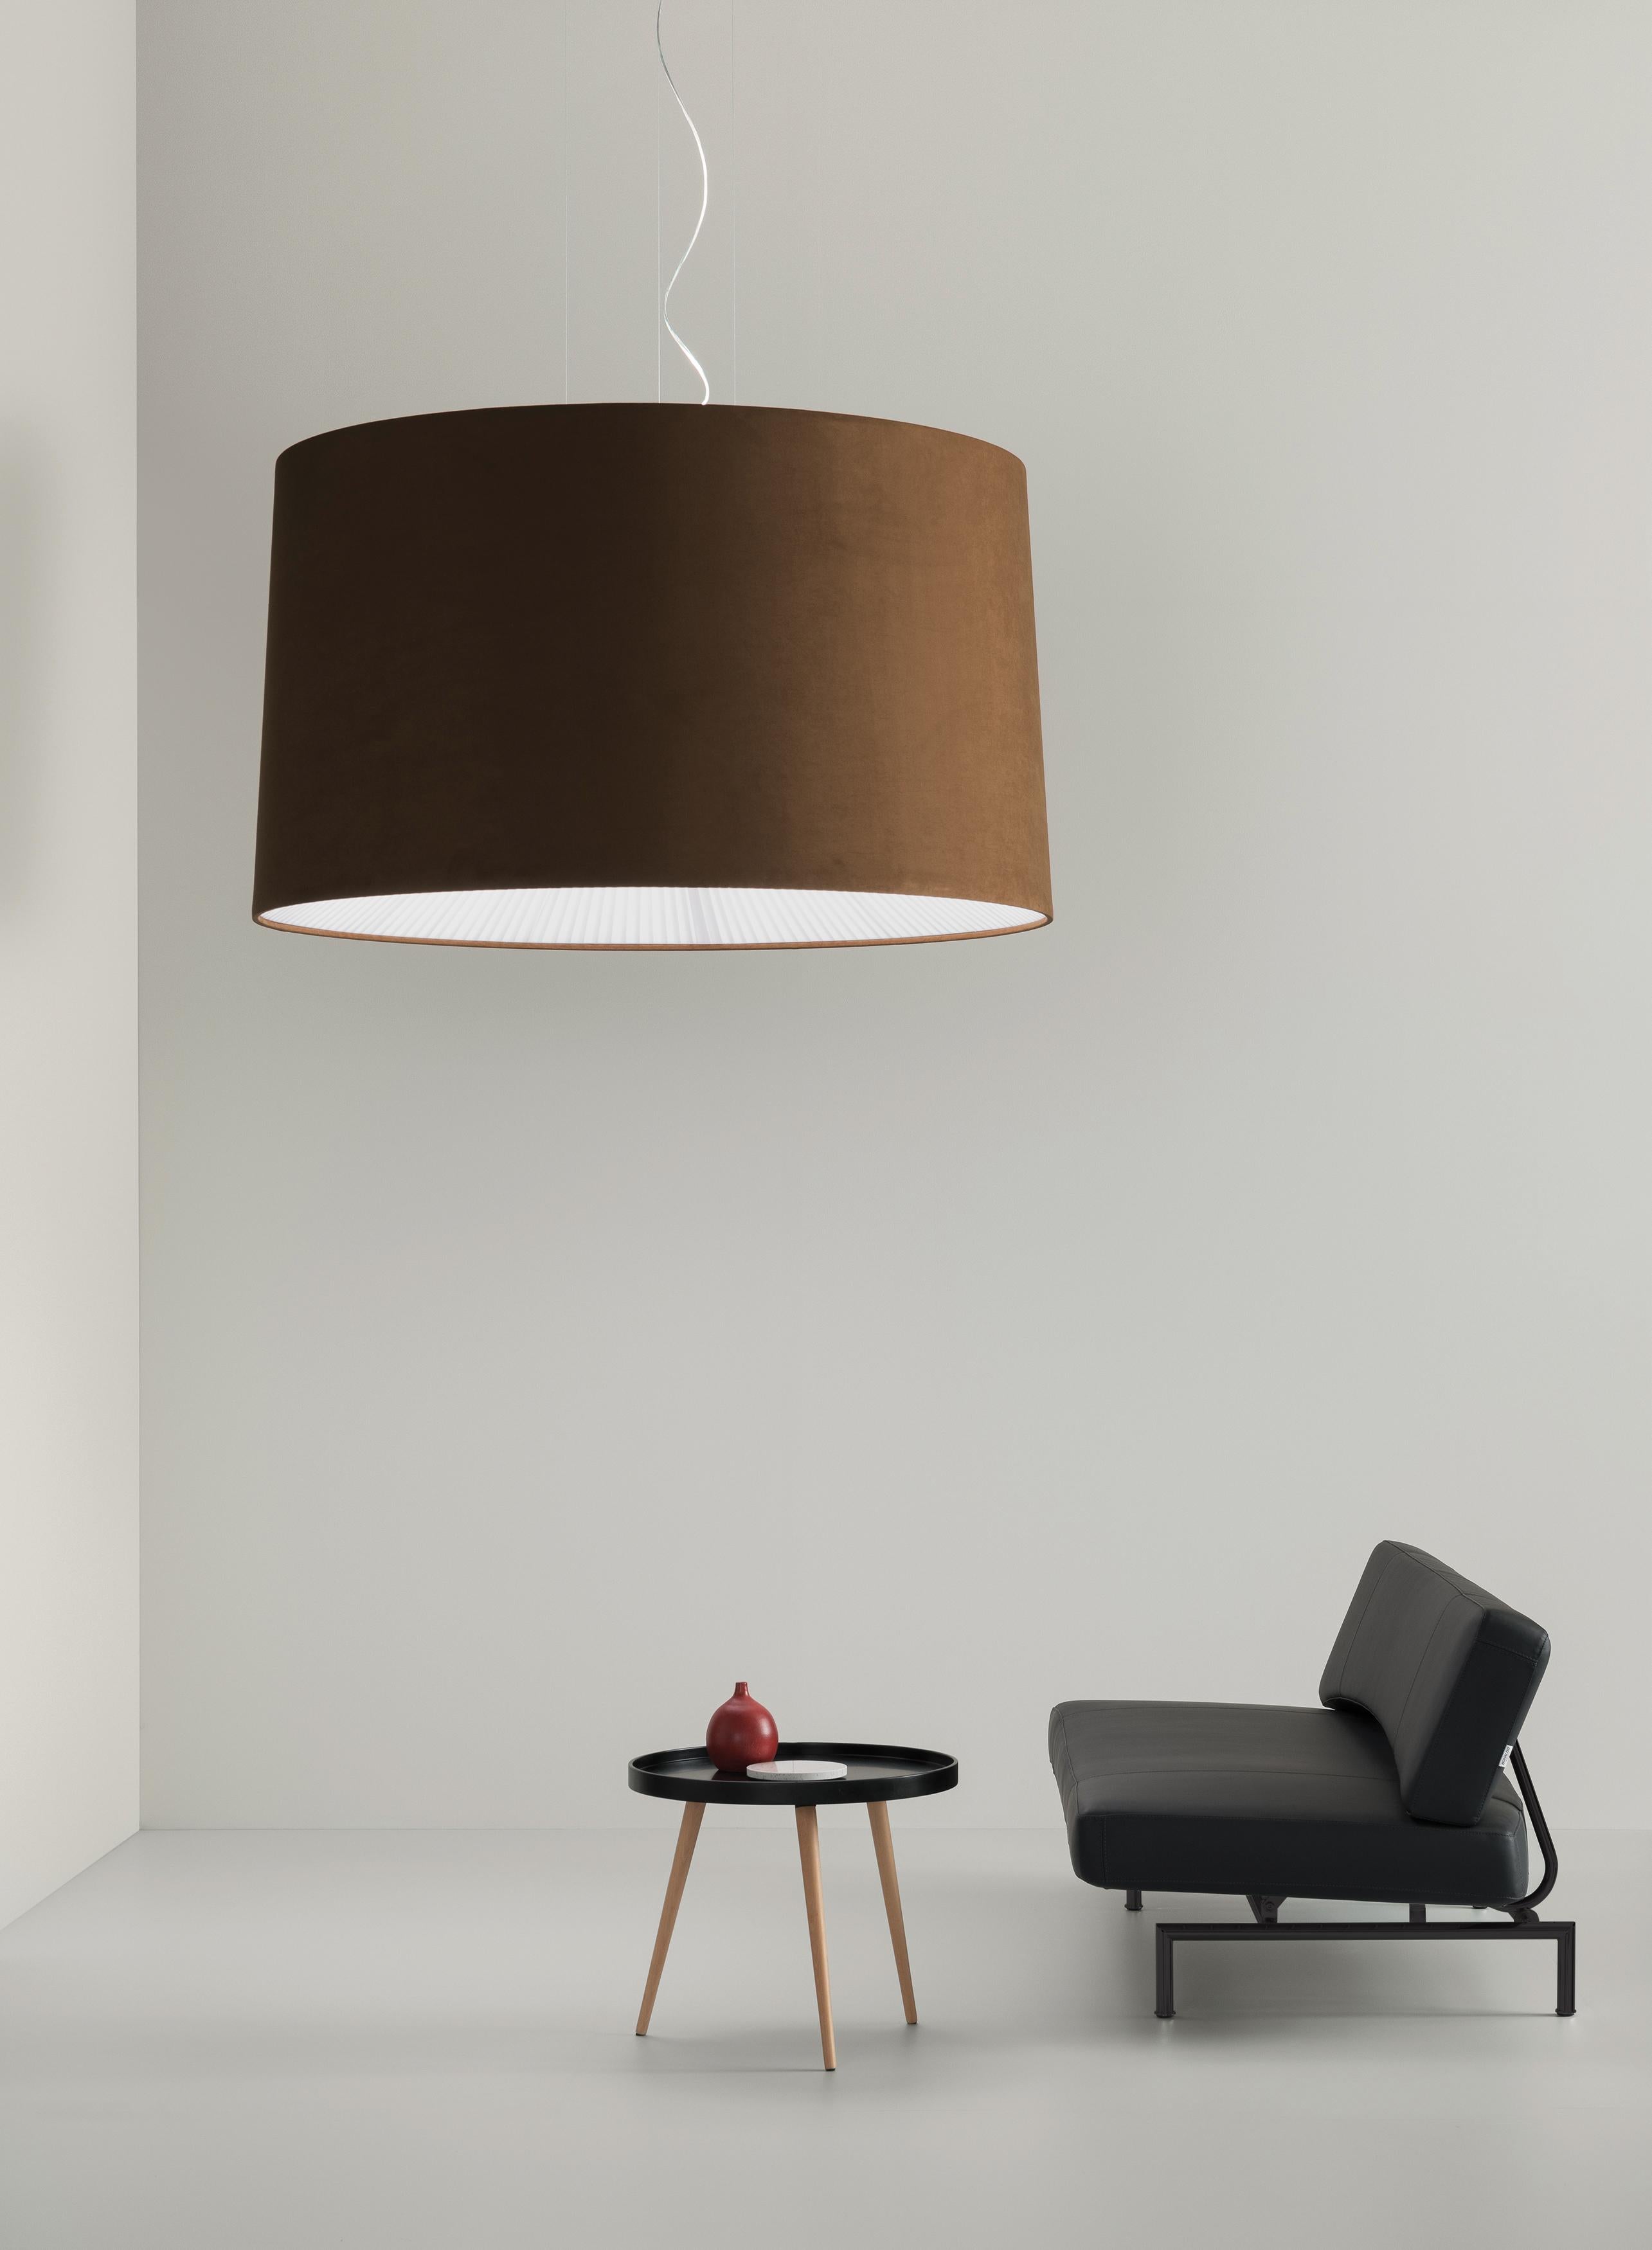 Axolight Large Velvet Ceiling Lamp in Ivory by Manuel & Vanessa Vivian

Even in its ceiling version, Velvet maintains its elegance and refinement intact. The simplicity of its geometry is enriched by a sophisticated fabric. The multidimensionality